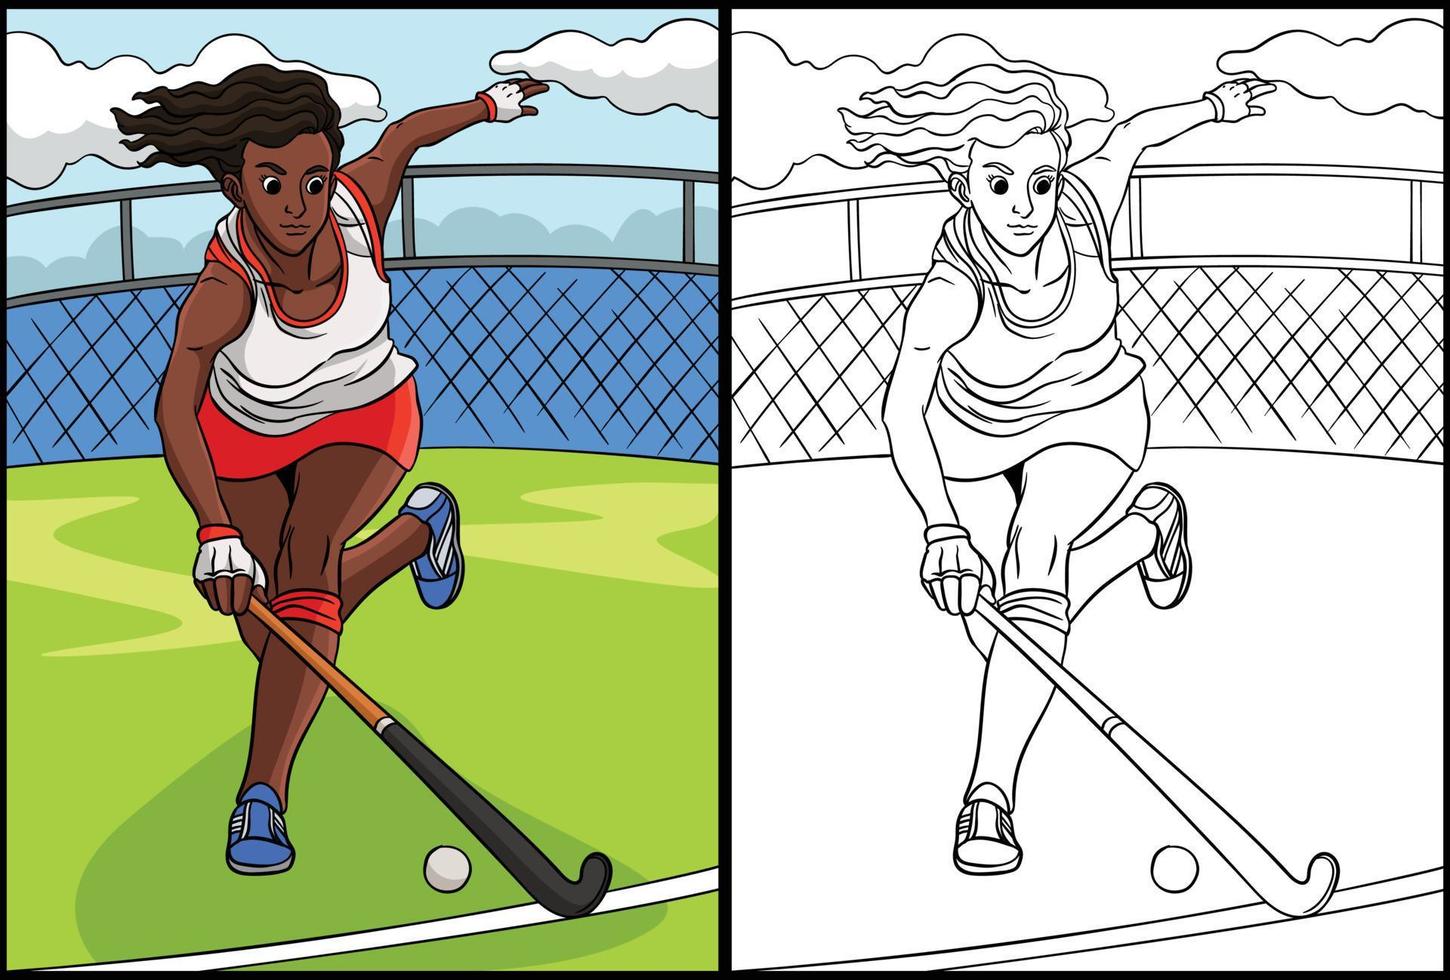 Field Hockey Coloring Page Colored Illustration vector